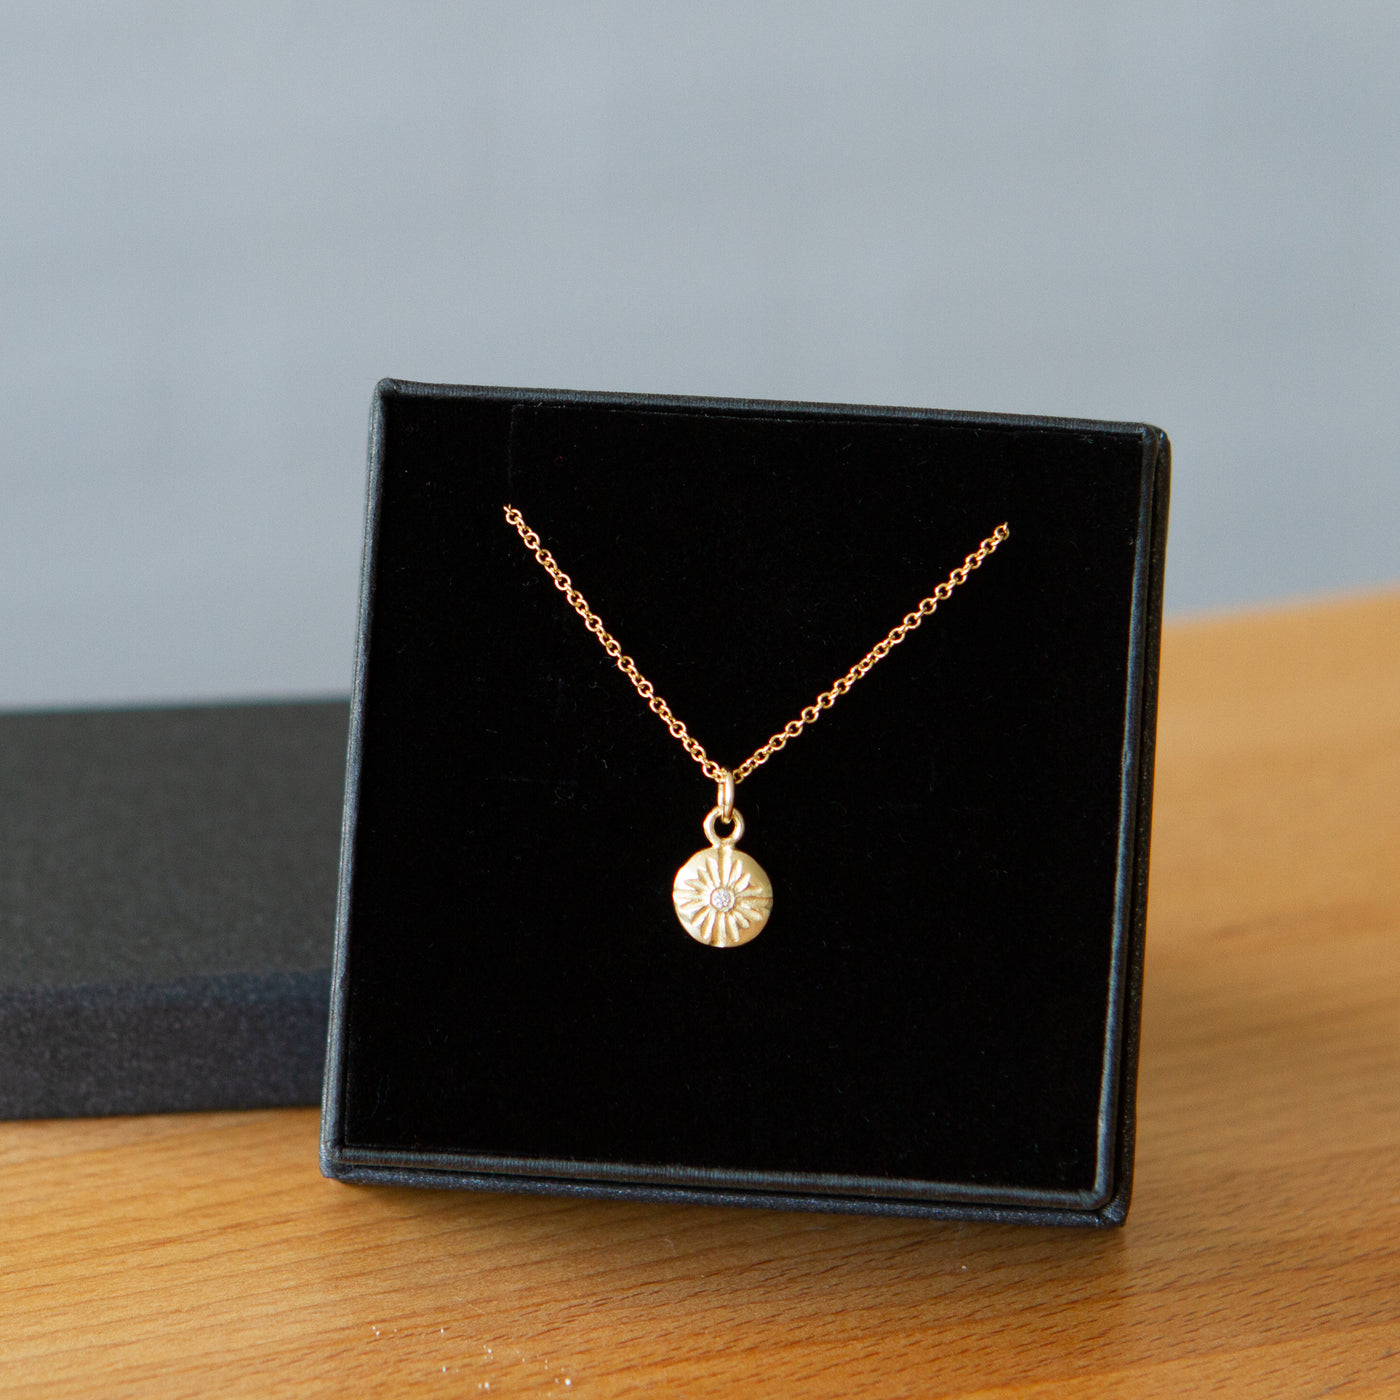 Gold and Diamond Small Sunburst Lucia Necklace in a gift box